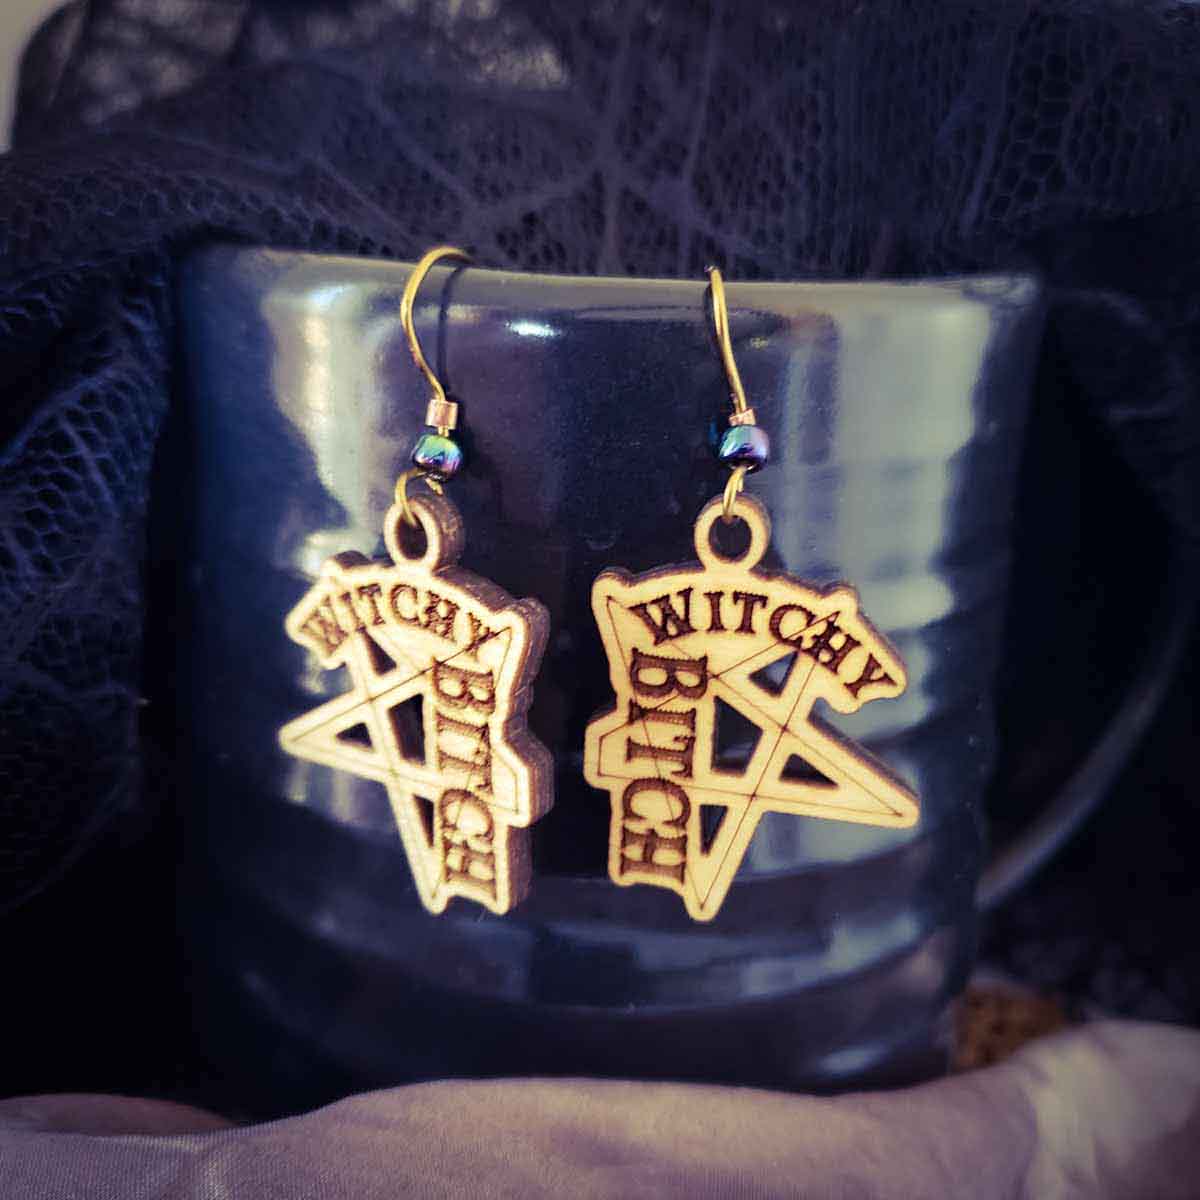 witchy bitch earrings; society bitch earrings; pentagram earrings; Melasdesign Handmade Darkness; witchy jewelry; gift for witches